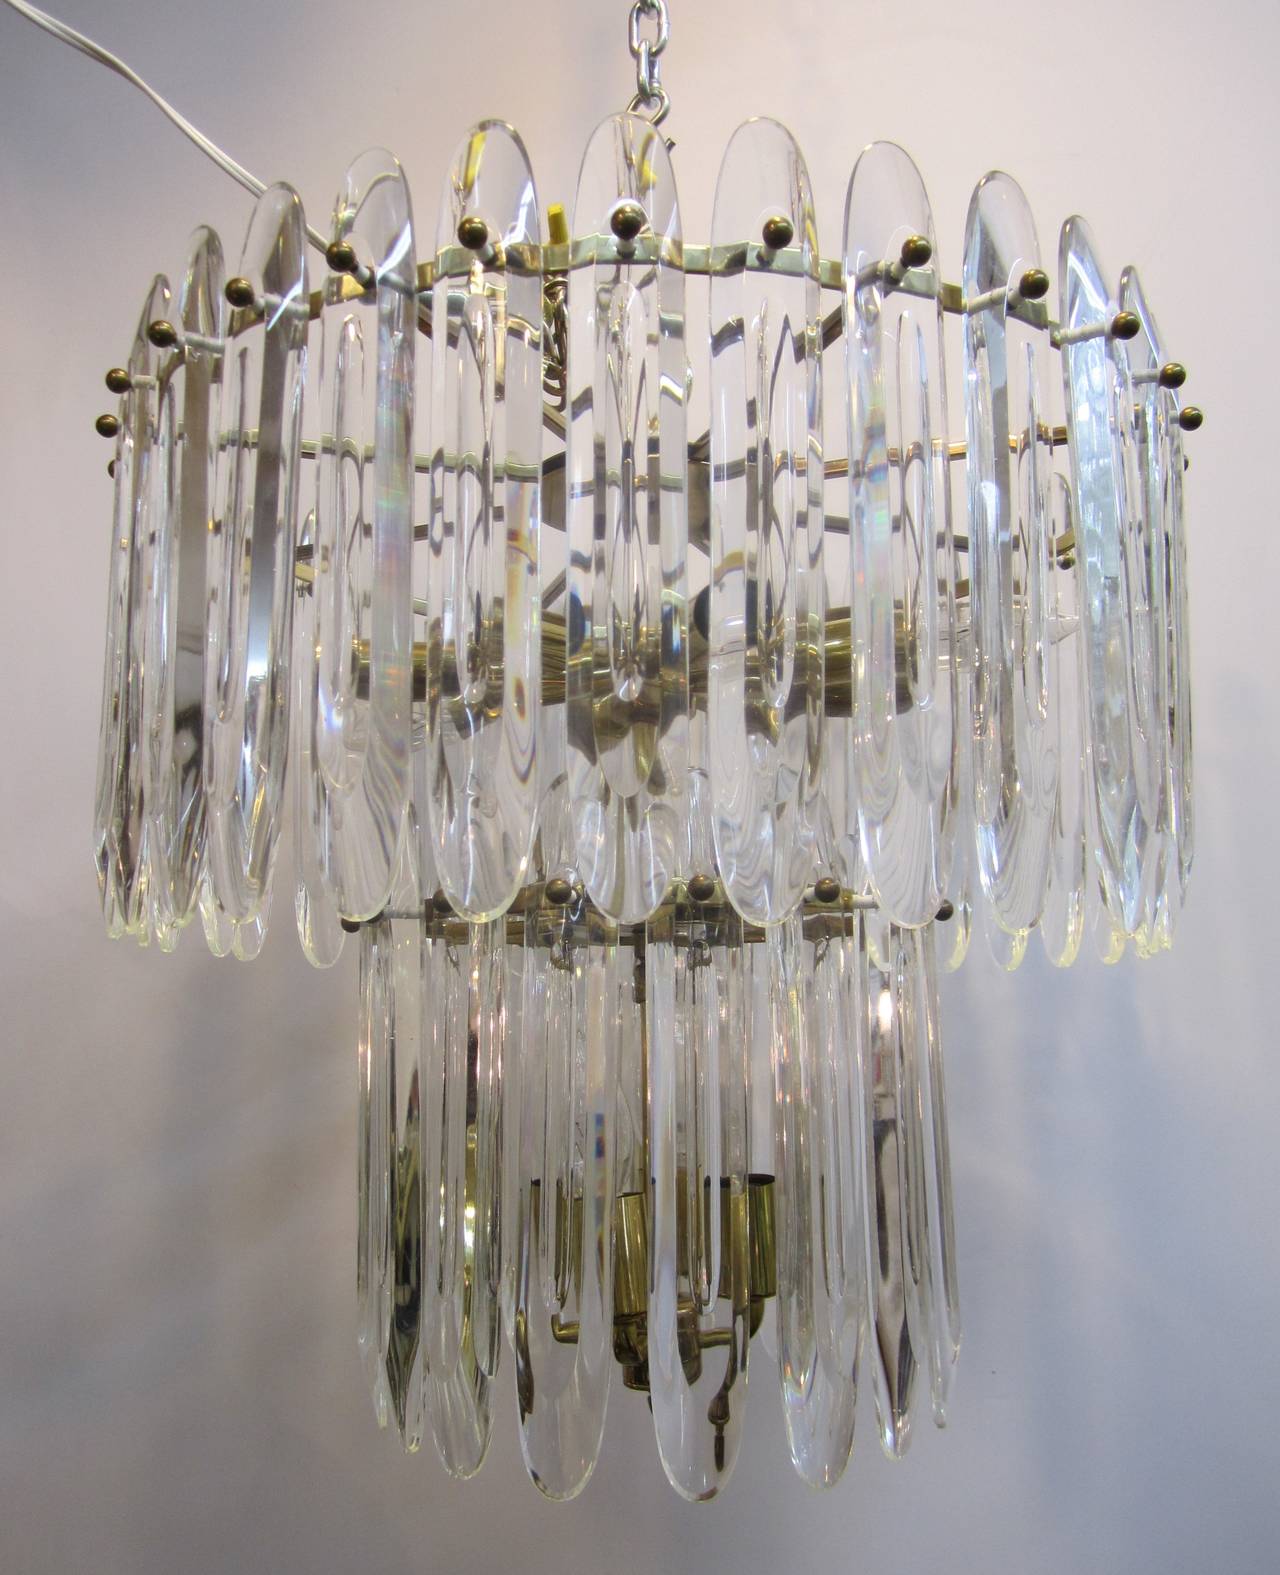 An Italian crystal and brass chandelier by designer Gaetano Sciolari, mid-20th century, circa 1960s, Italy. Chandelier has long crystals with rounded corners, two-tiers, with 12-light sockets, on a brass frame. Chandelier measures: 17.5